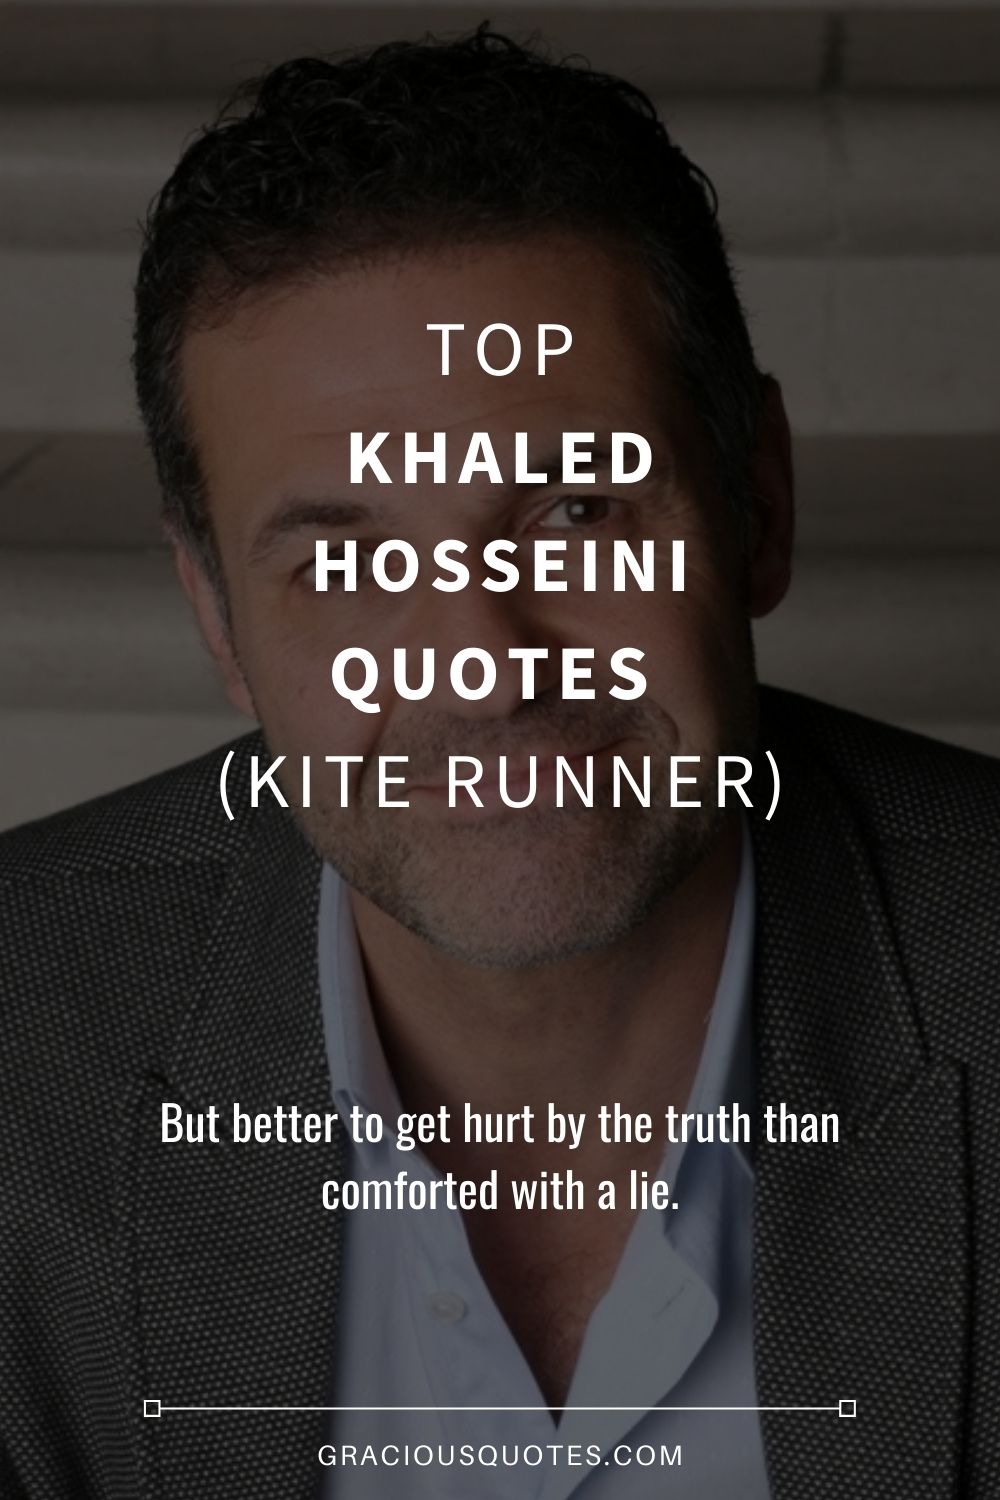 Top Khaled Hosseini Quotes (KITE RUNNER) - Gracious Quotes